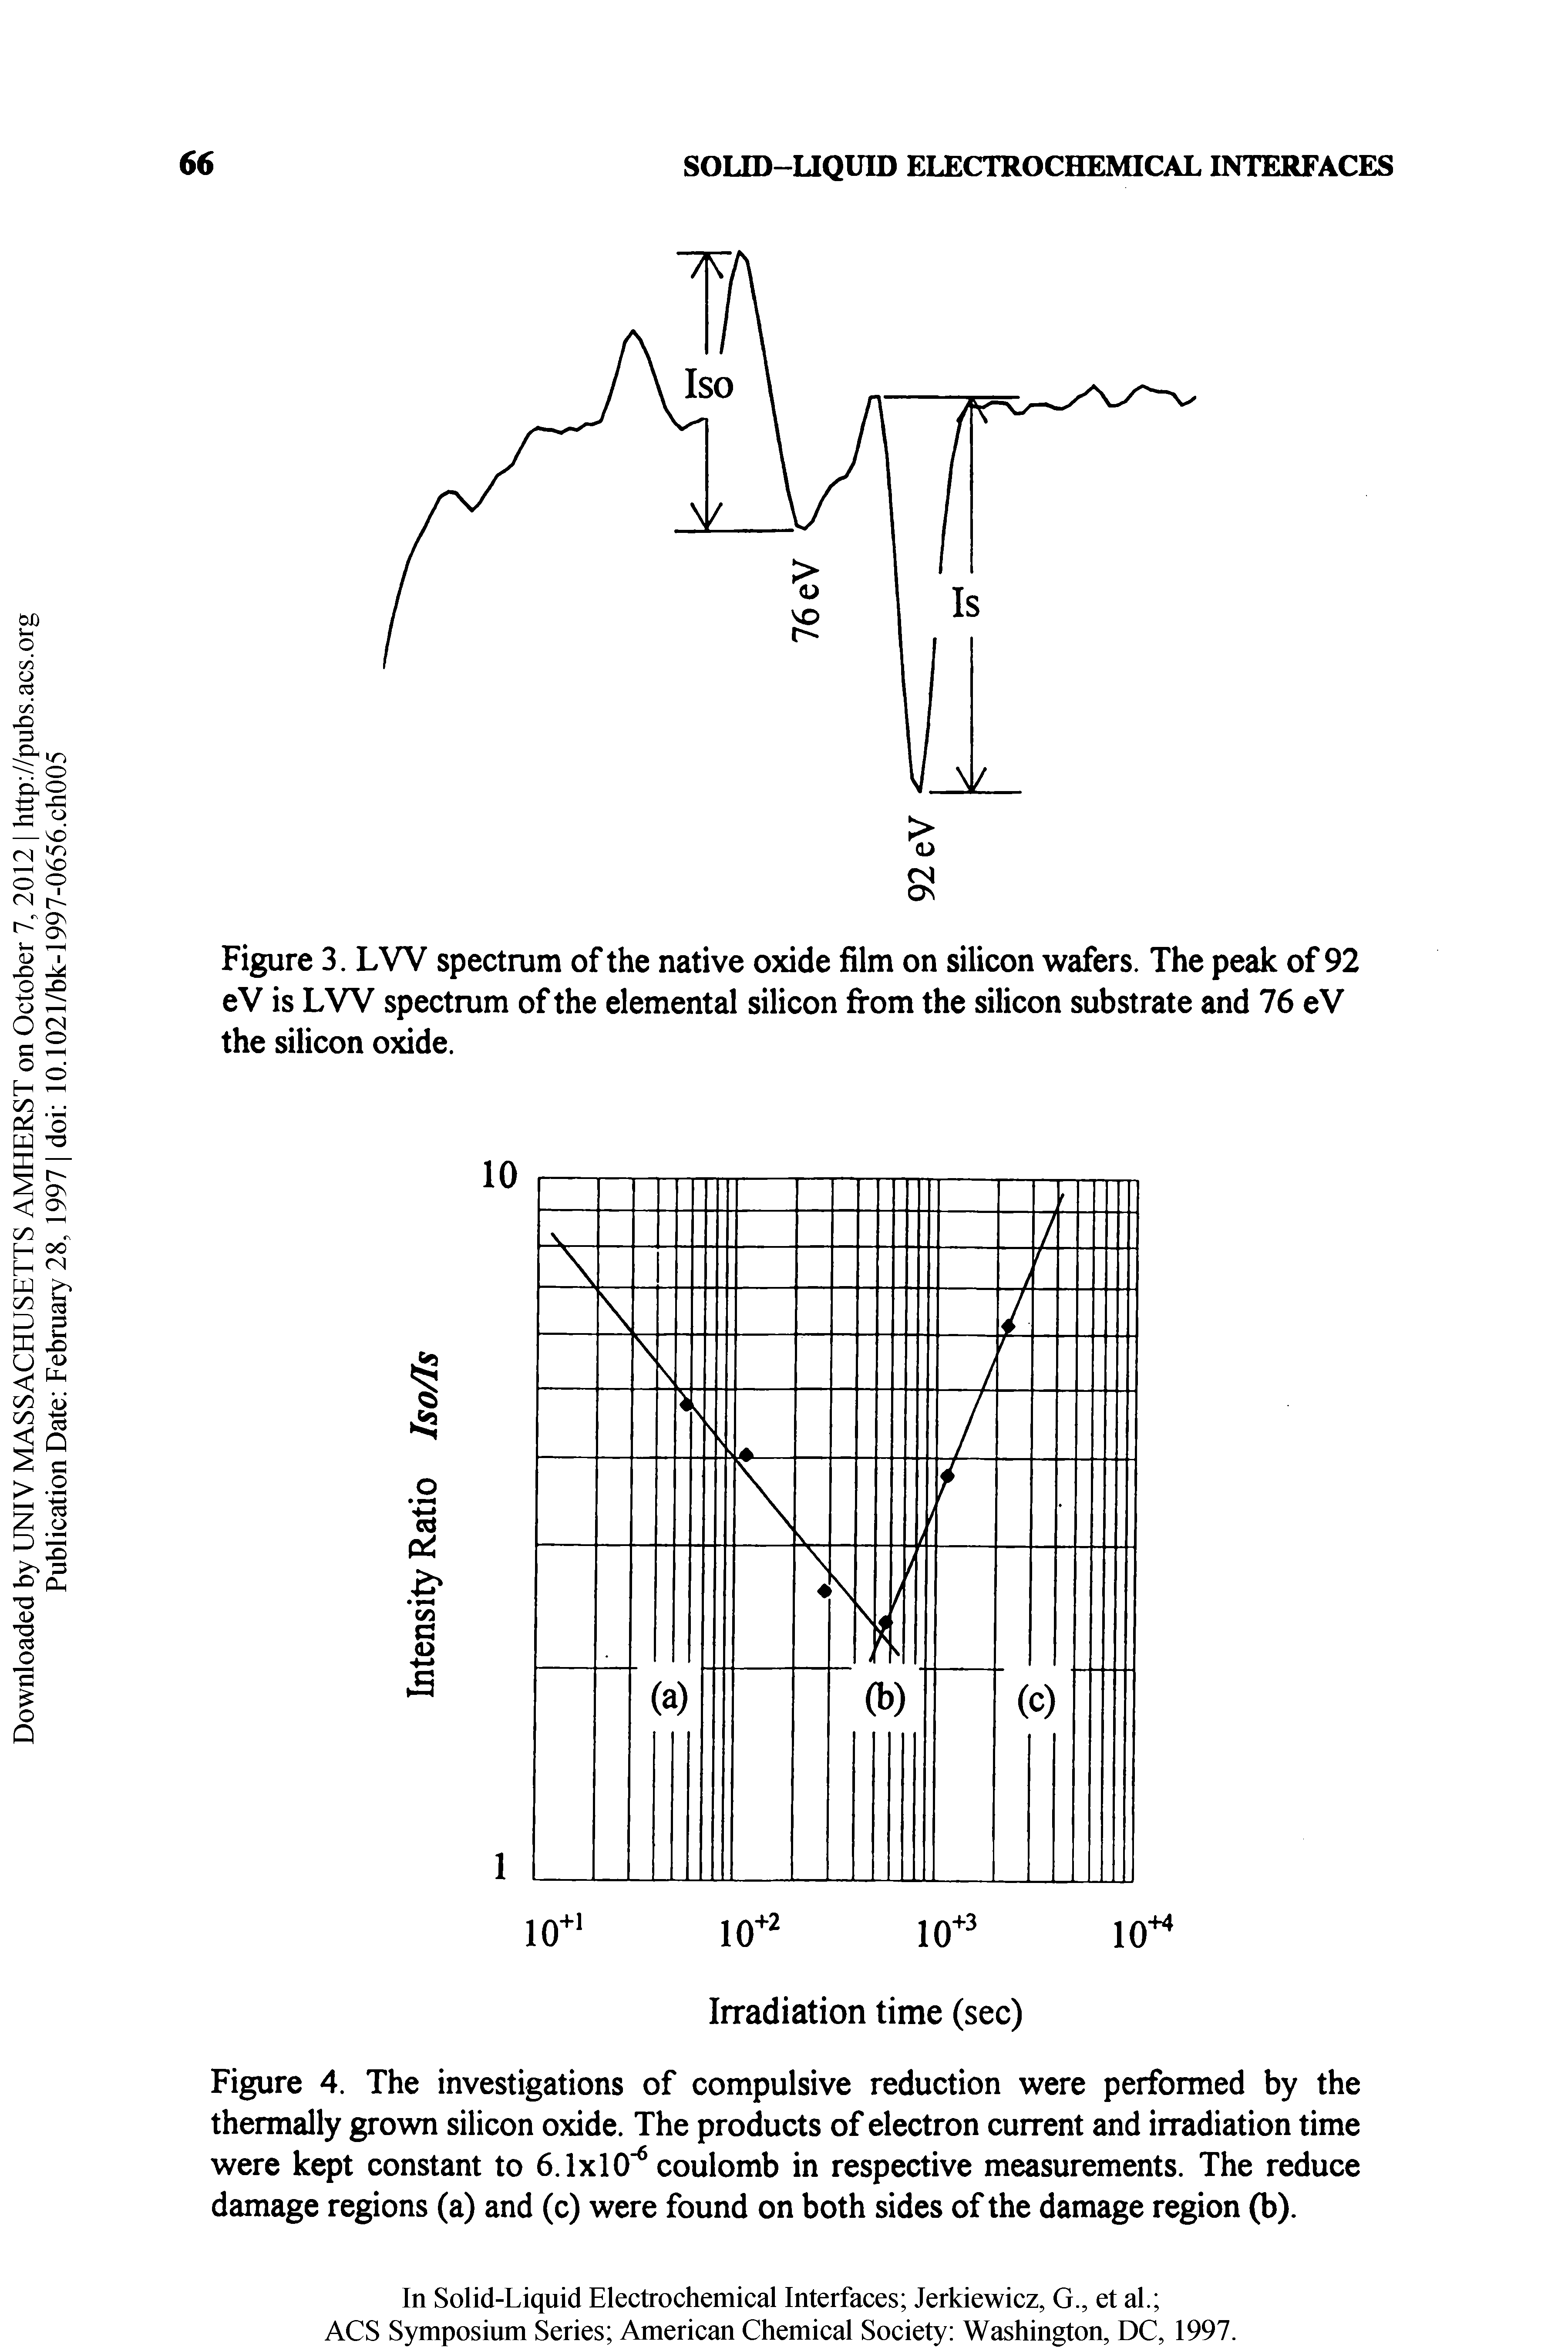 Figure 4. The investigations of compulsive reduction were performed by the thermally grown silicon oxide. The products of electron current and irradiation time were kept constant to 6.1x10" coulomb in respective measurements. The reduce damage regions (a) and (c) were found on both sides of the damage region (b).